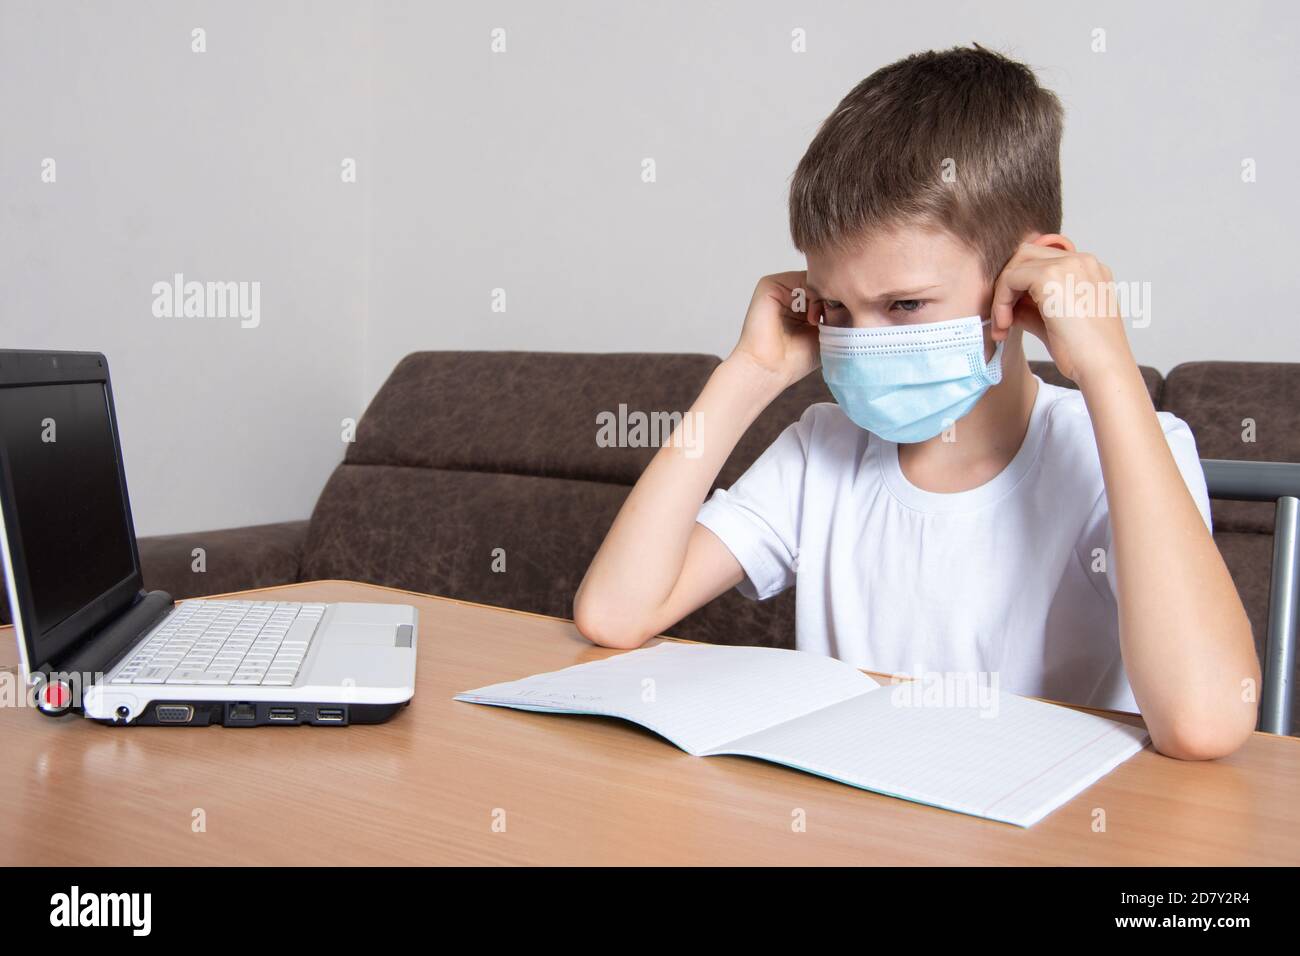 A child in a protective mask on his face looks displeasedly at a laptop, a boy learns remotely online at home Stock Photo